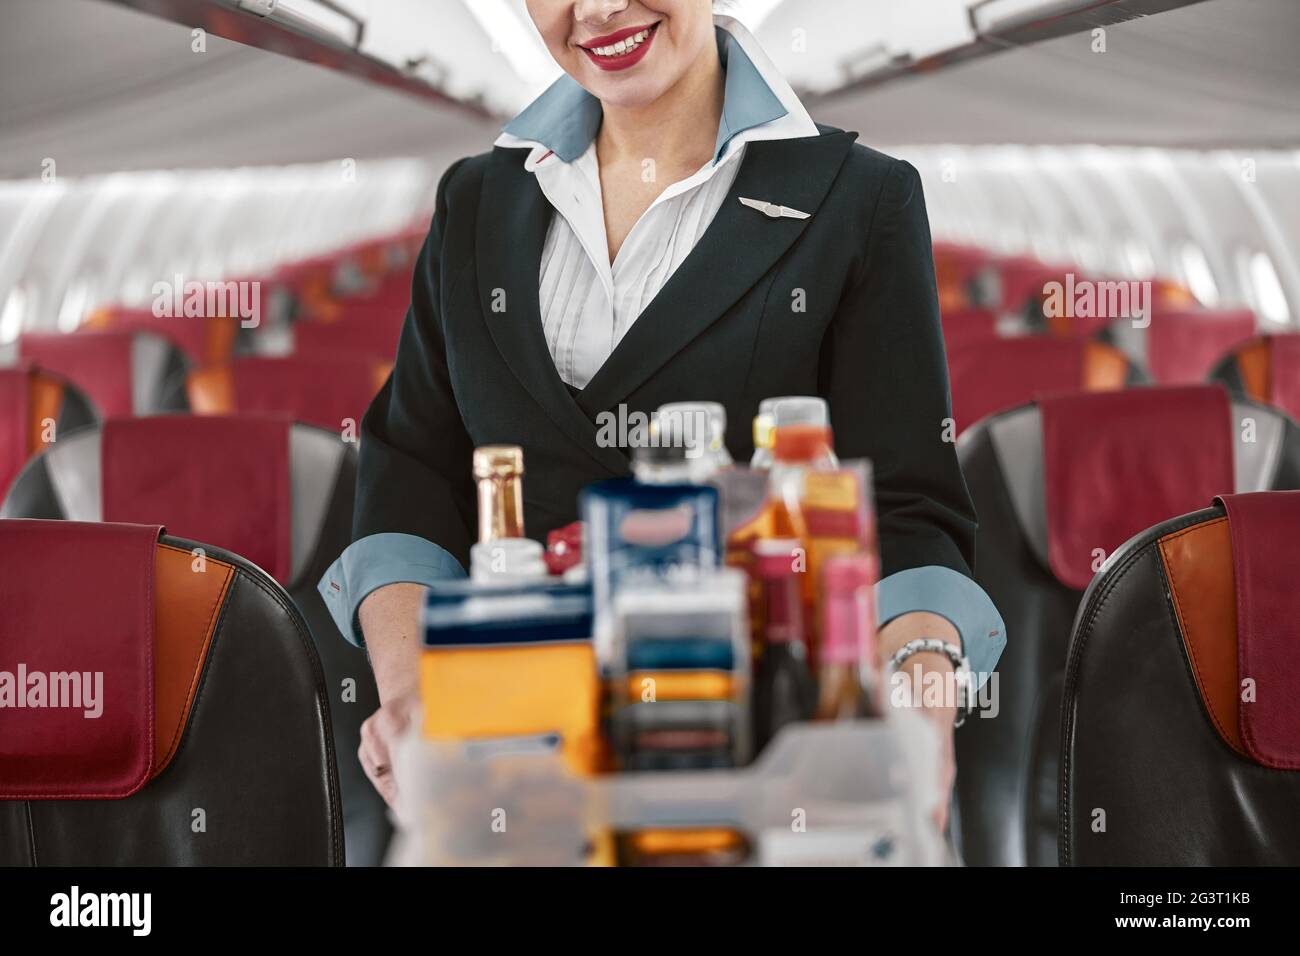 Stewardess with food trolley in cabin of airplane Stock Photo - Alamy